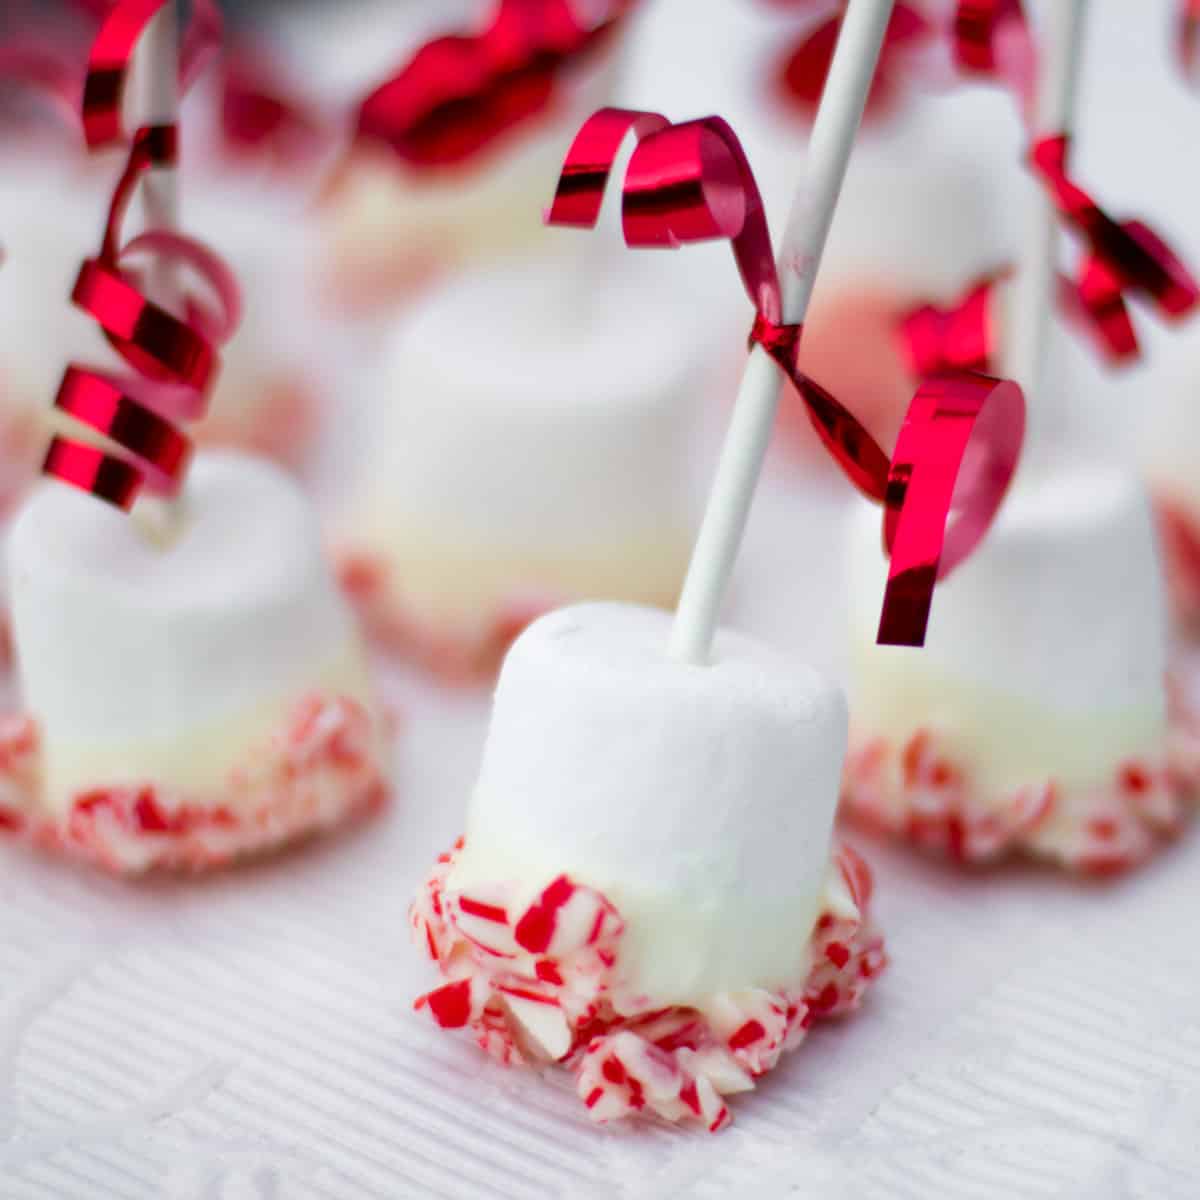 Shiny red ribbons on popsicle sticks with marshmallows.